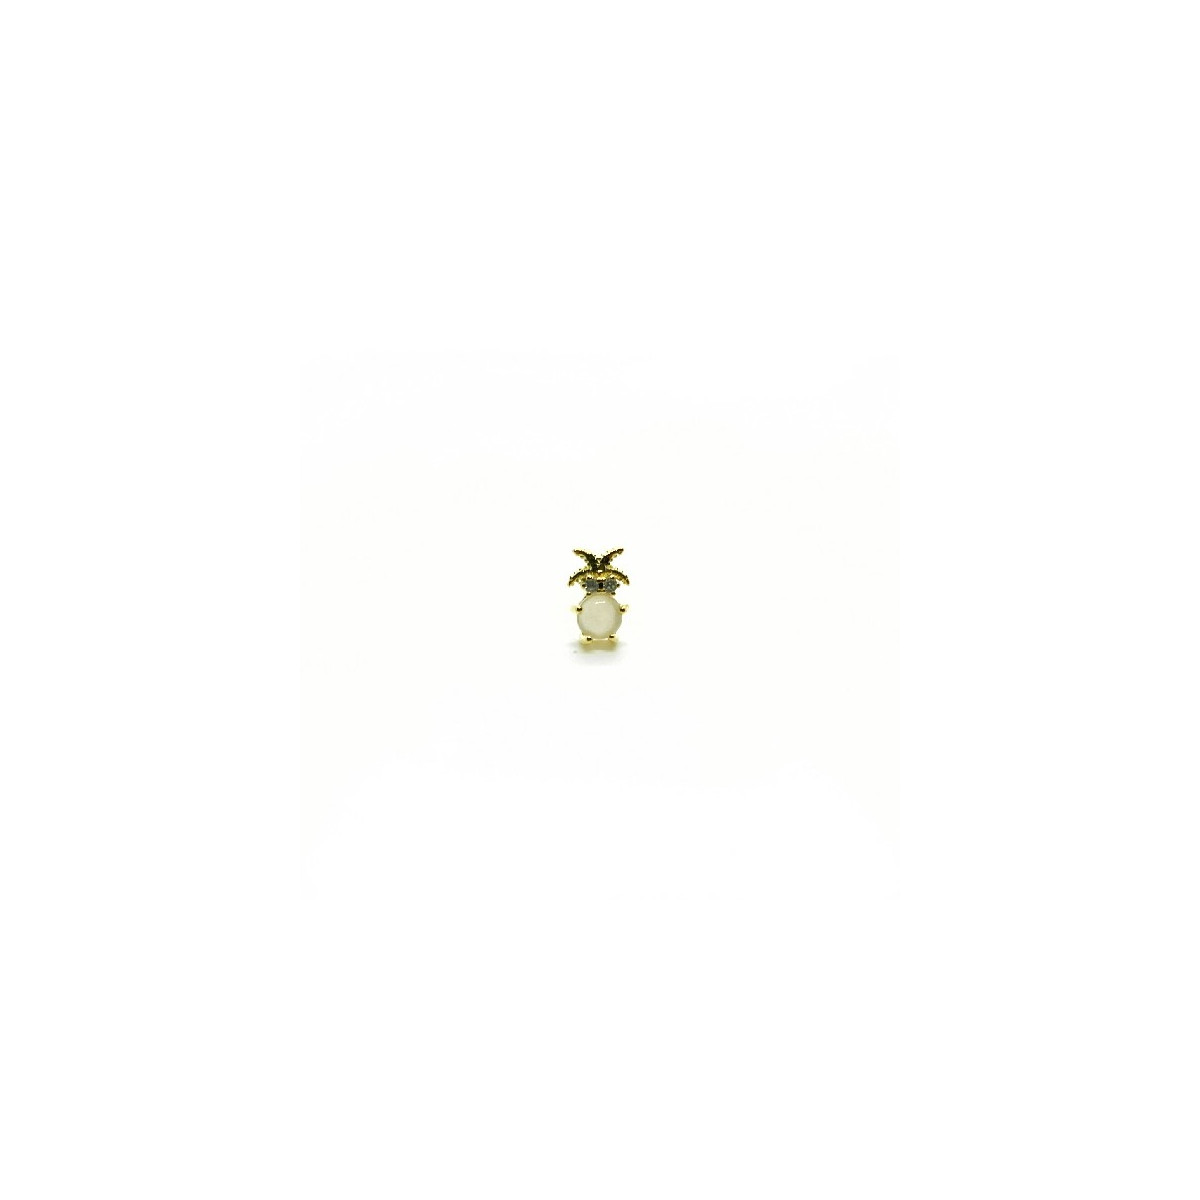 MINI LINEARGENT EARRING - PACKMAR/3